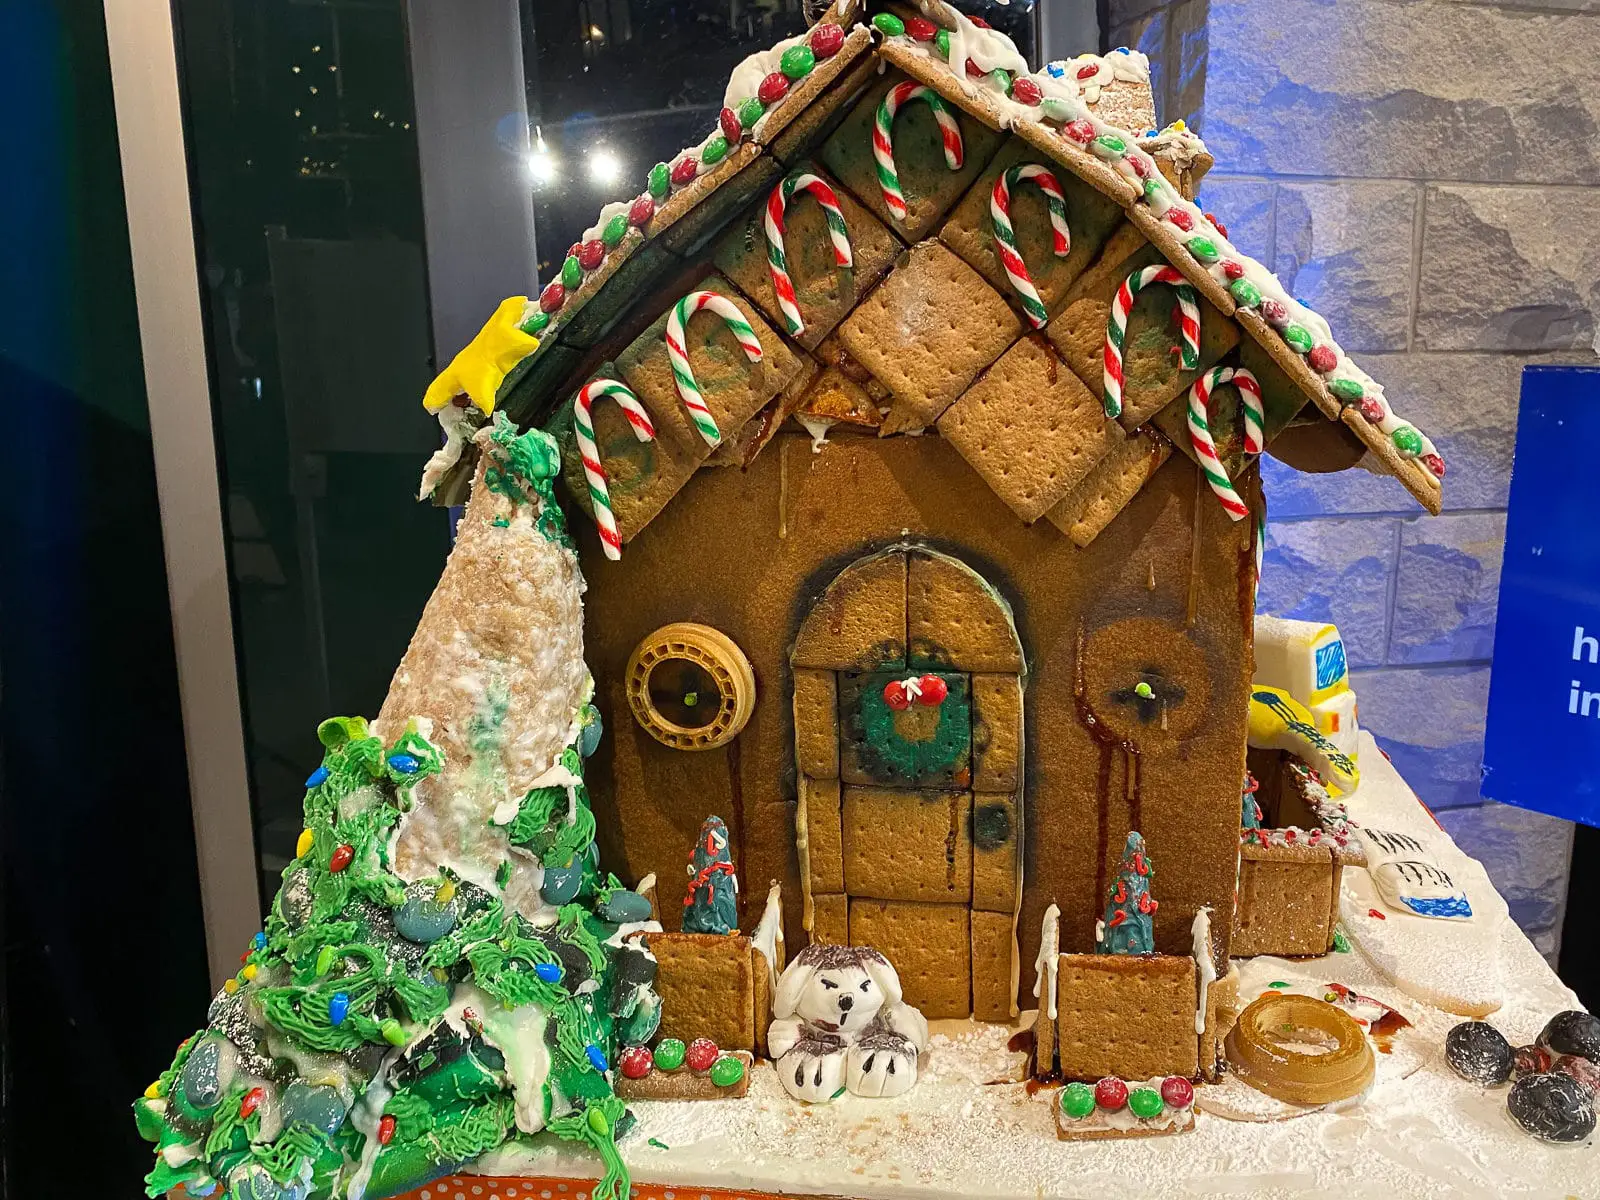 One of the more classic gingerbread houses in the Annual Gingerbread Showcase in Victoria, BC